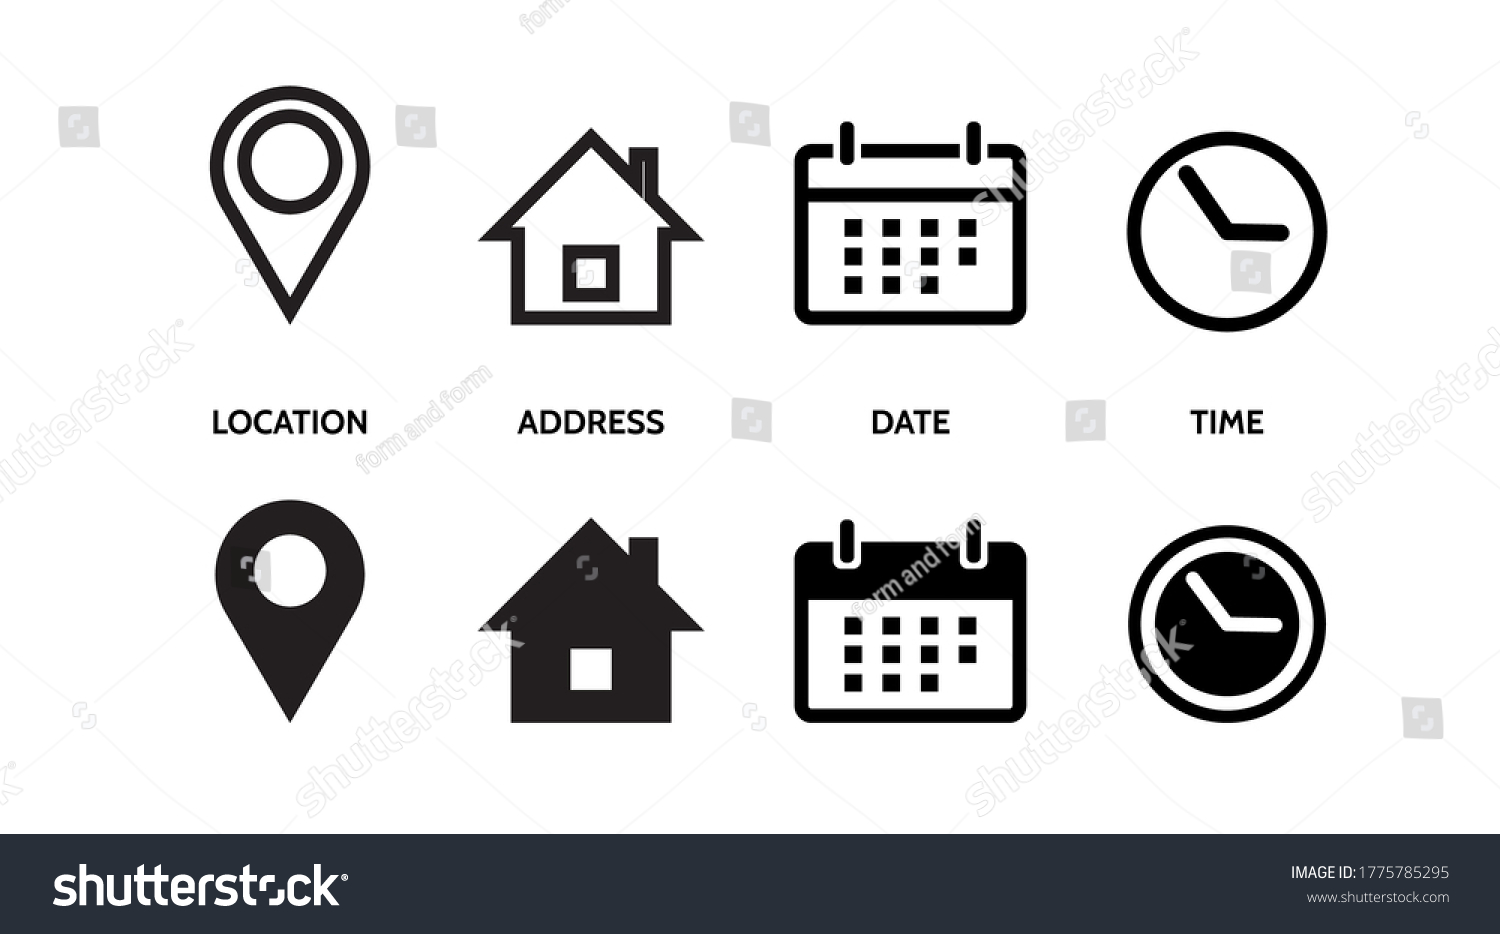 Location, Map pin, Address, date, time, contact, Calendar, home. set web icons vector line illustration #1775785295